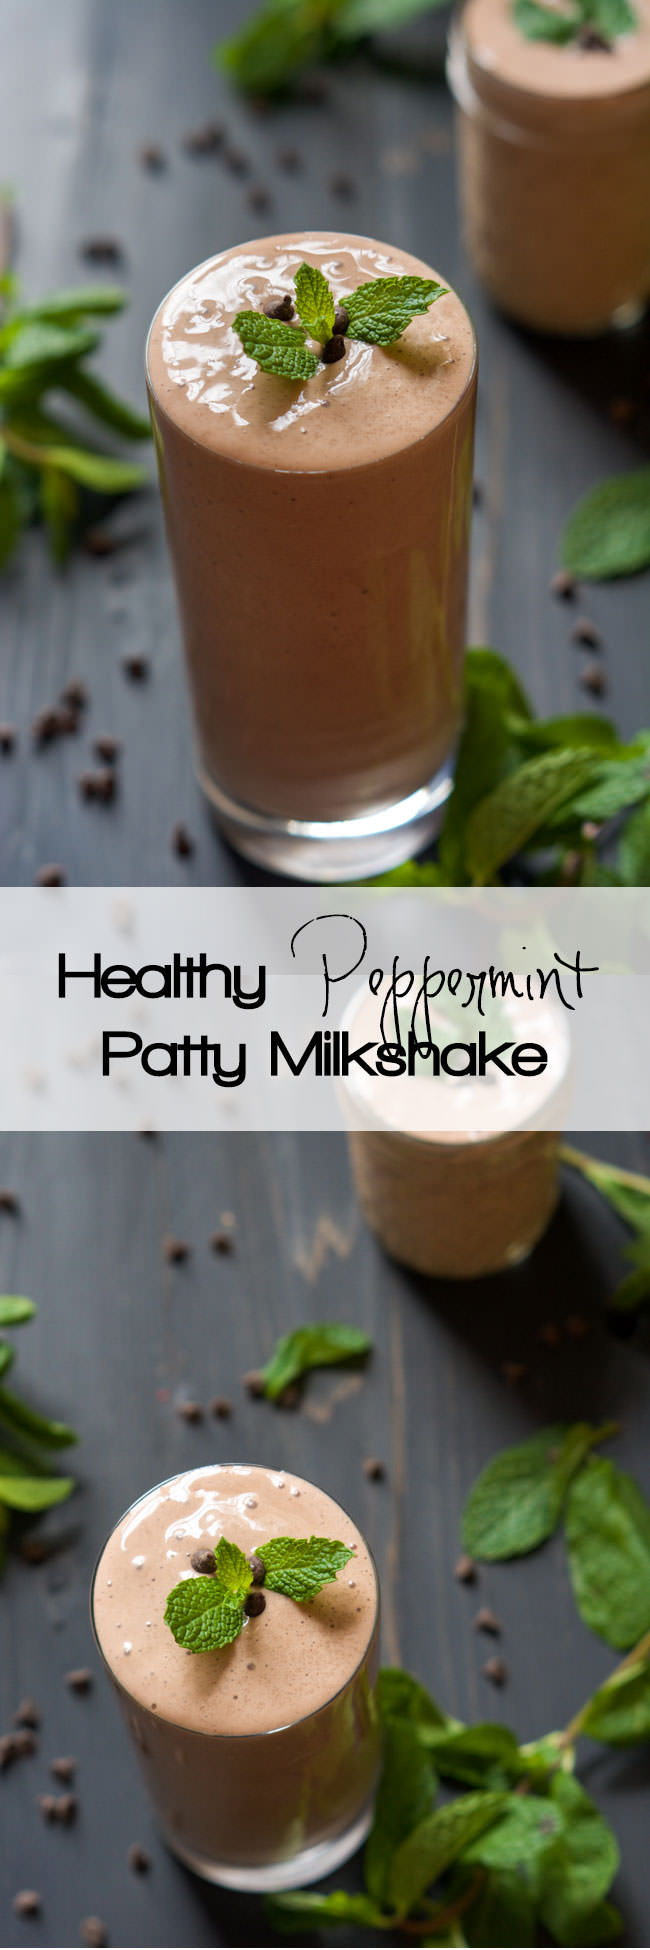 A dessert in a glass! This Skinny Peppermint Patty Shake is full of chocolate and mint! It is healthy enough for a high protein breakfast or quick snack! #peppermint #proteinshake #milkshake #glutenfree